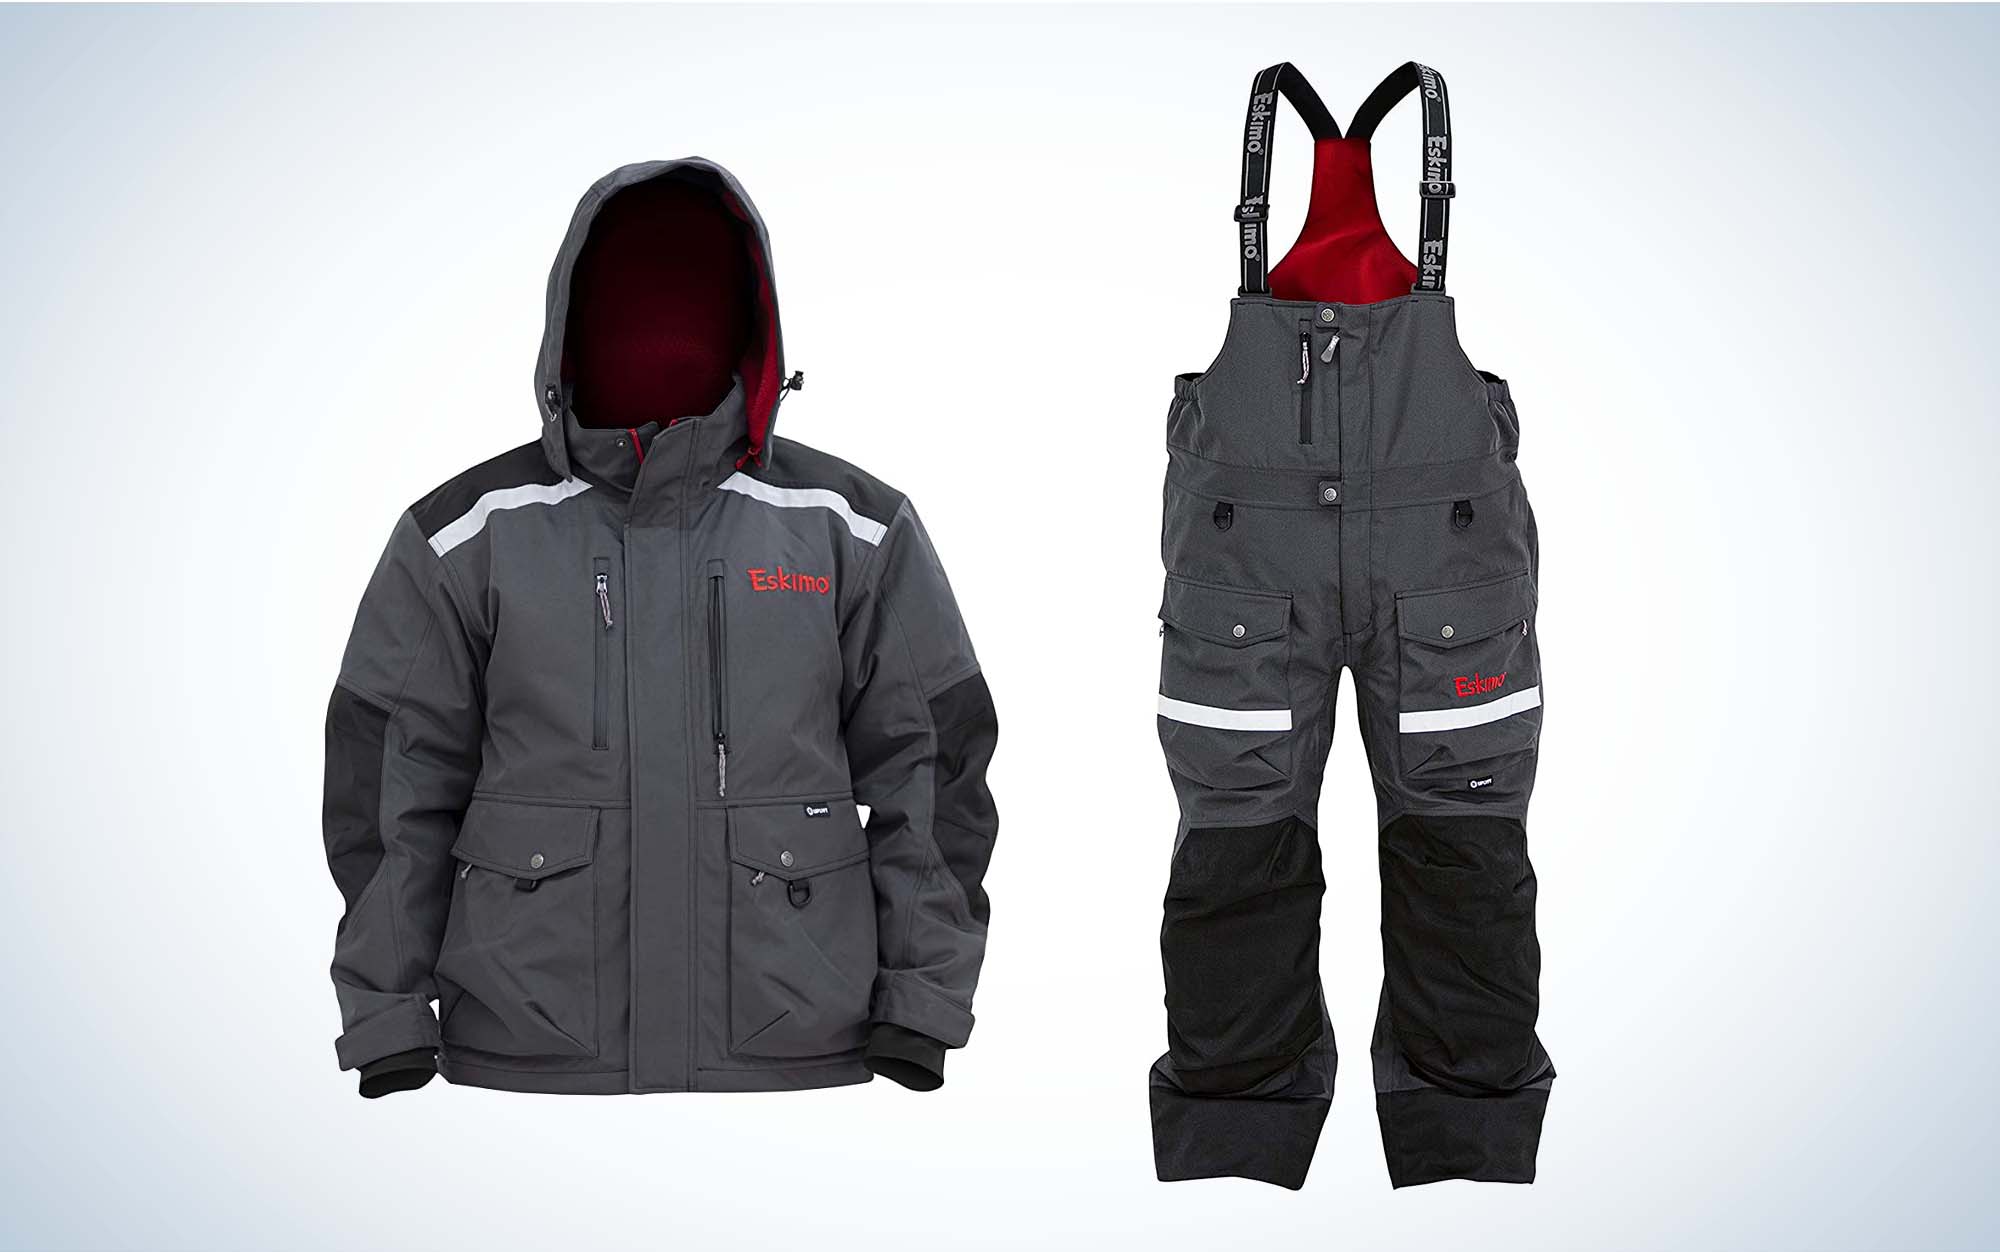 Aurora Series Ice Fishing Suit with Floatation, Insulated Waterproof Bibs  and Jacket for Ice Fishing